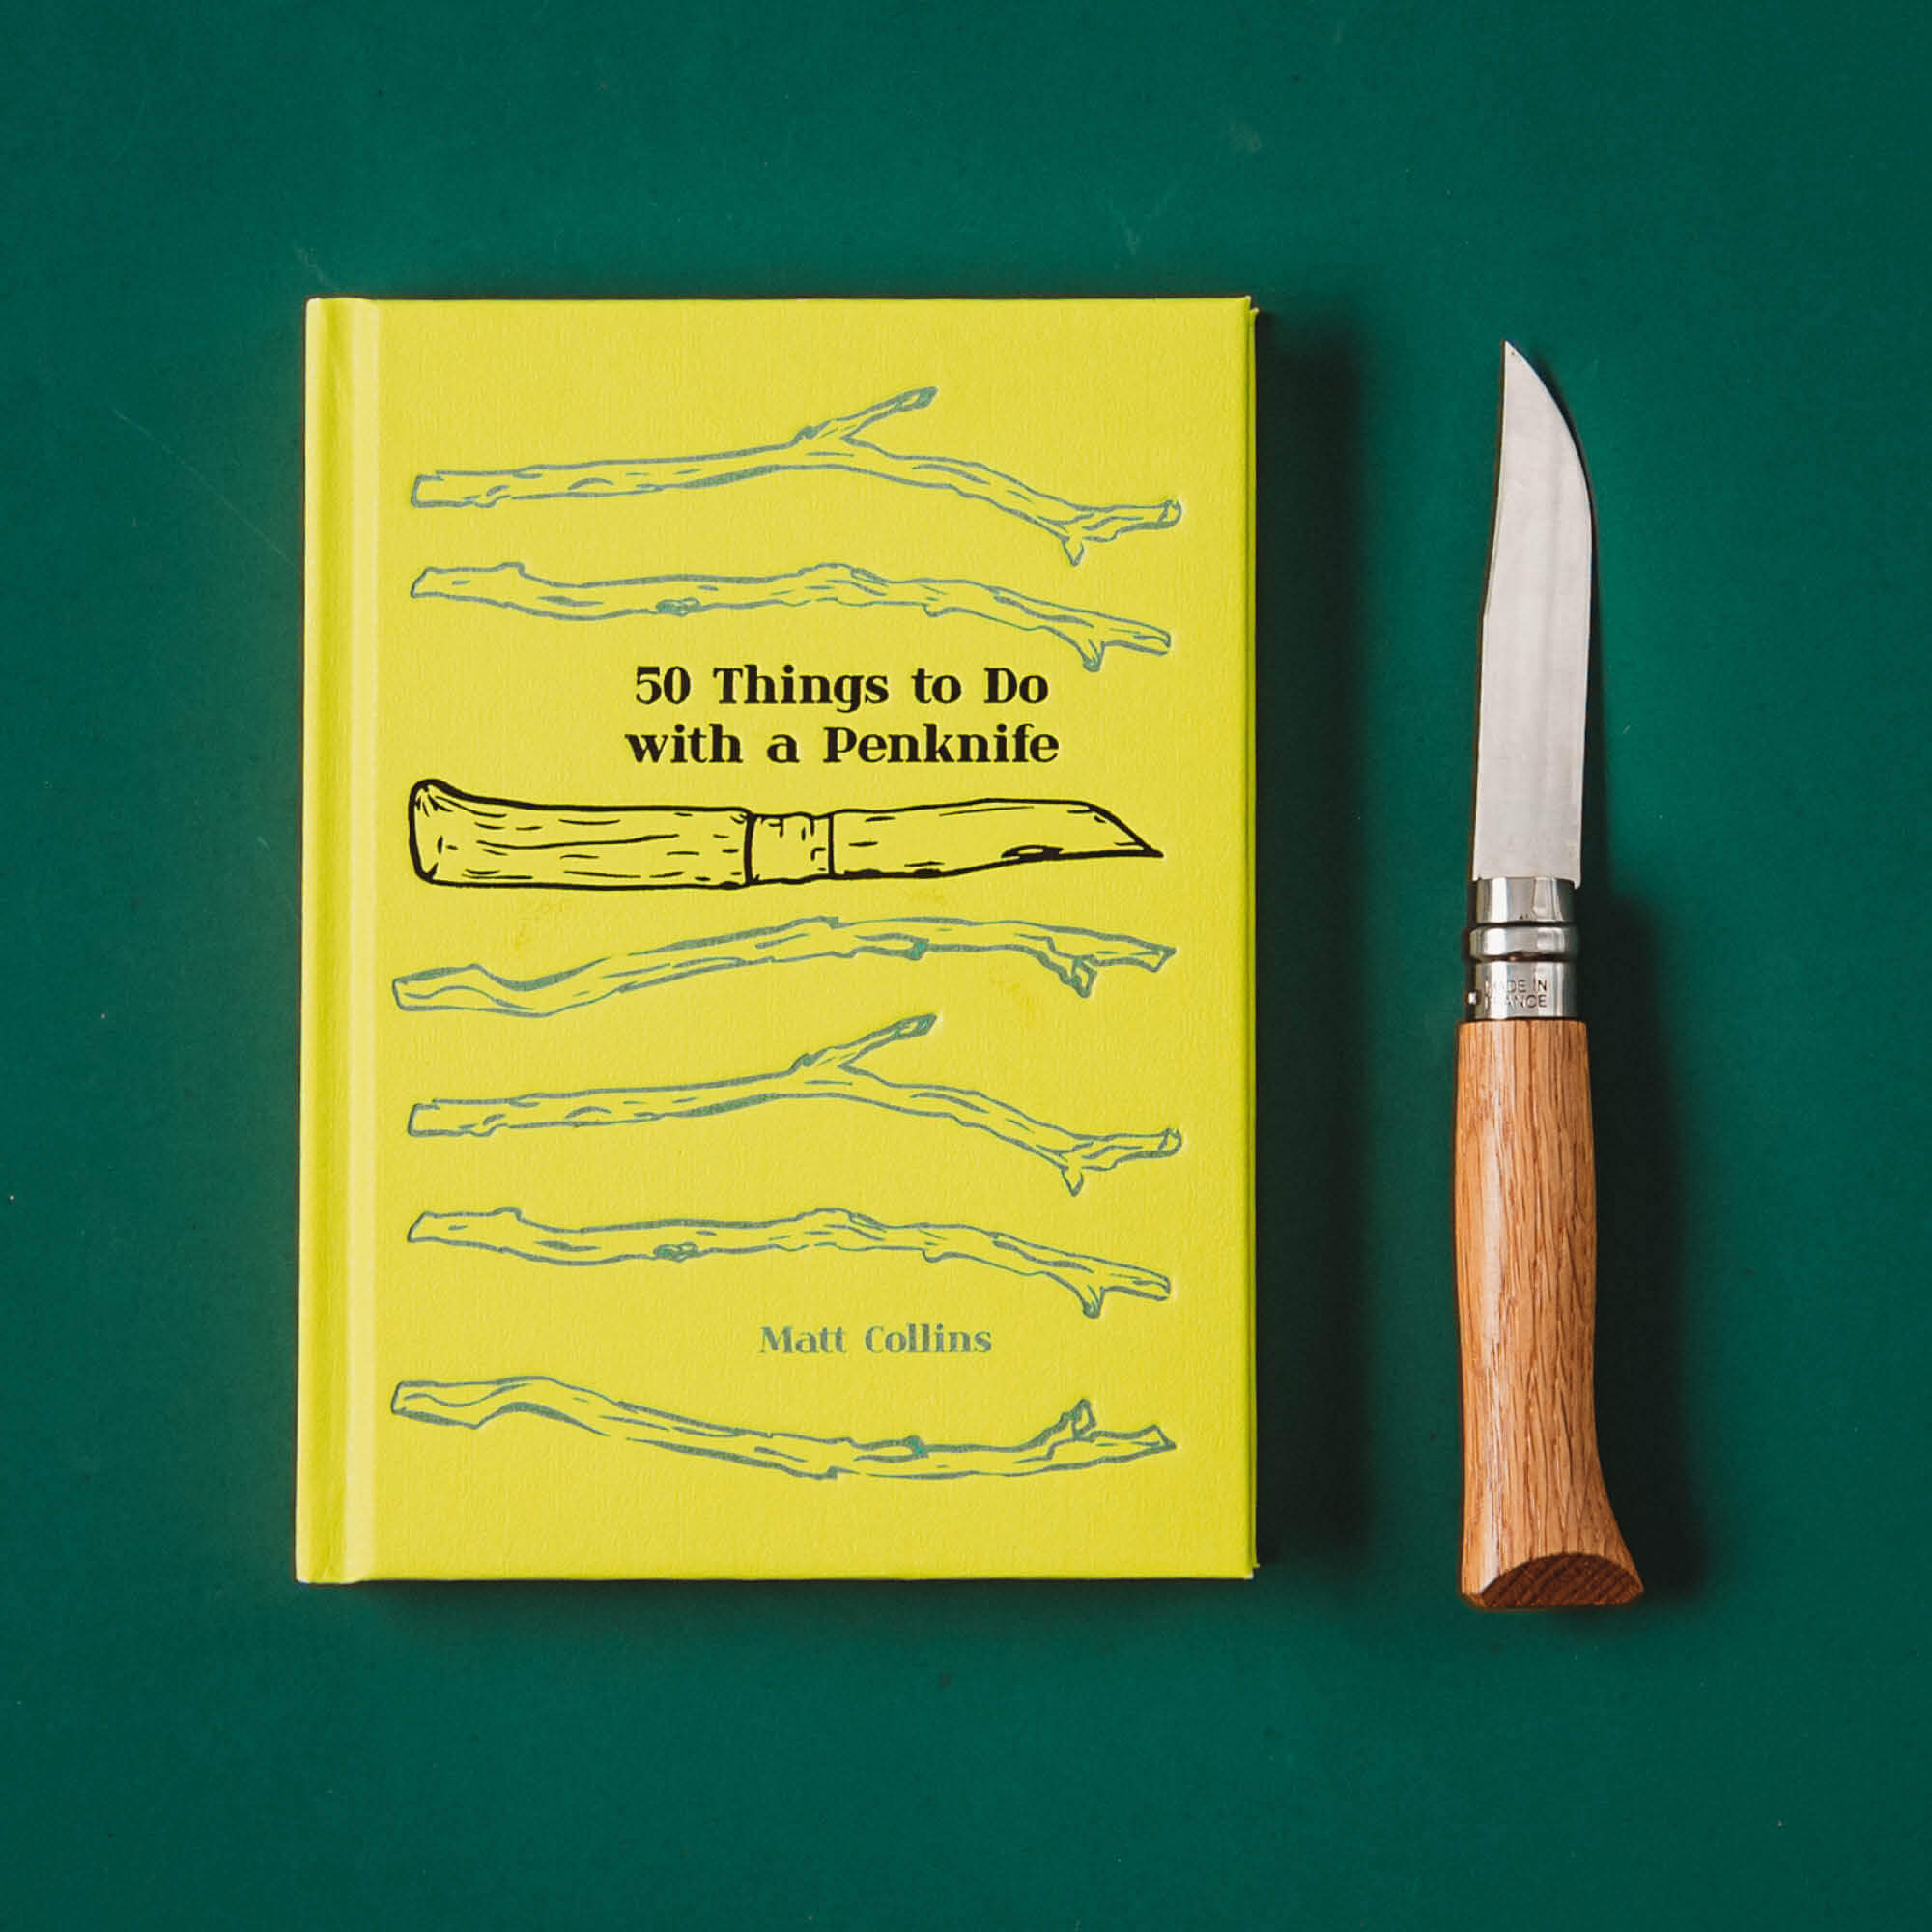 50 Things to do with a Penknife book by Matt Collins with advanced No08 wood whittling knife by Opinel, sold by Your Wild Books in a bundle for 13% off